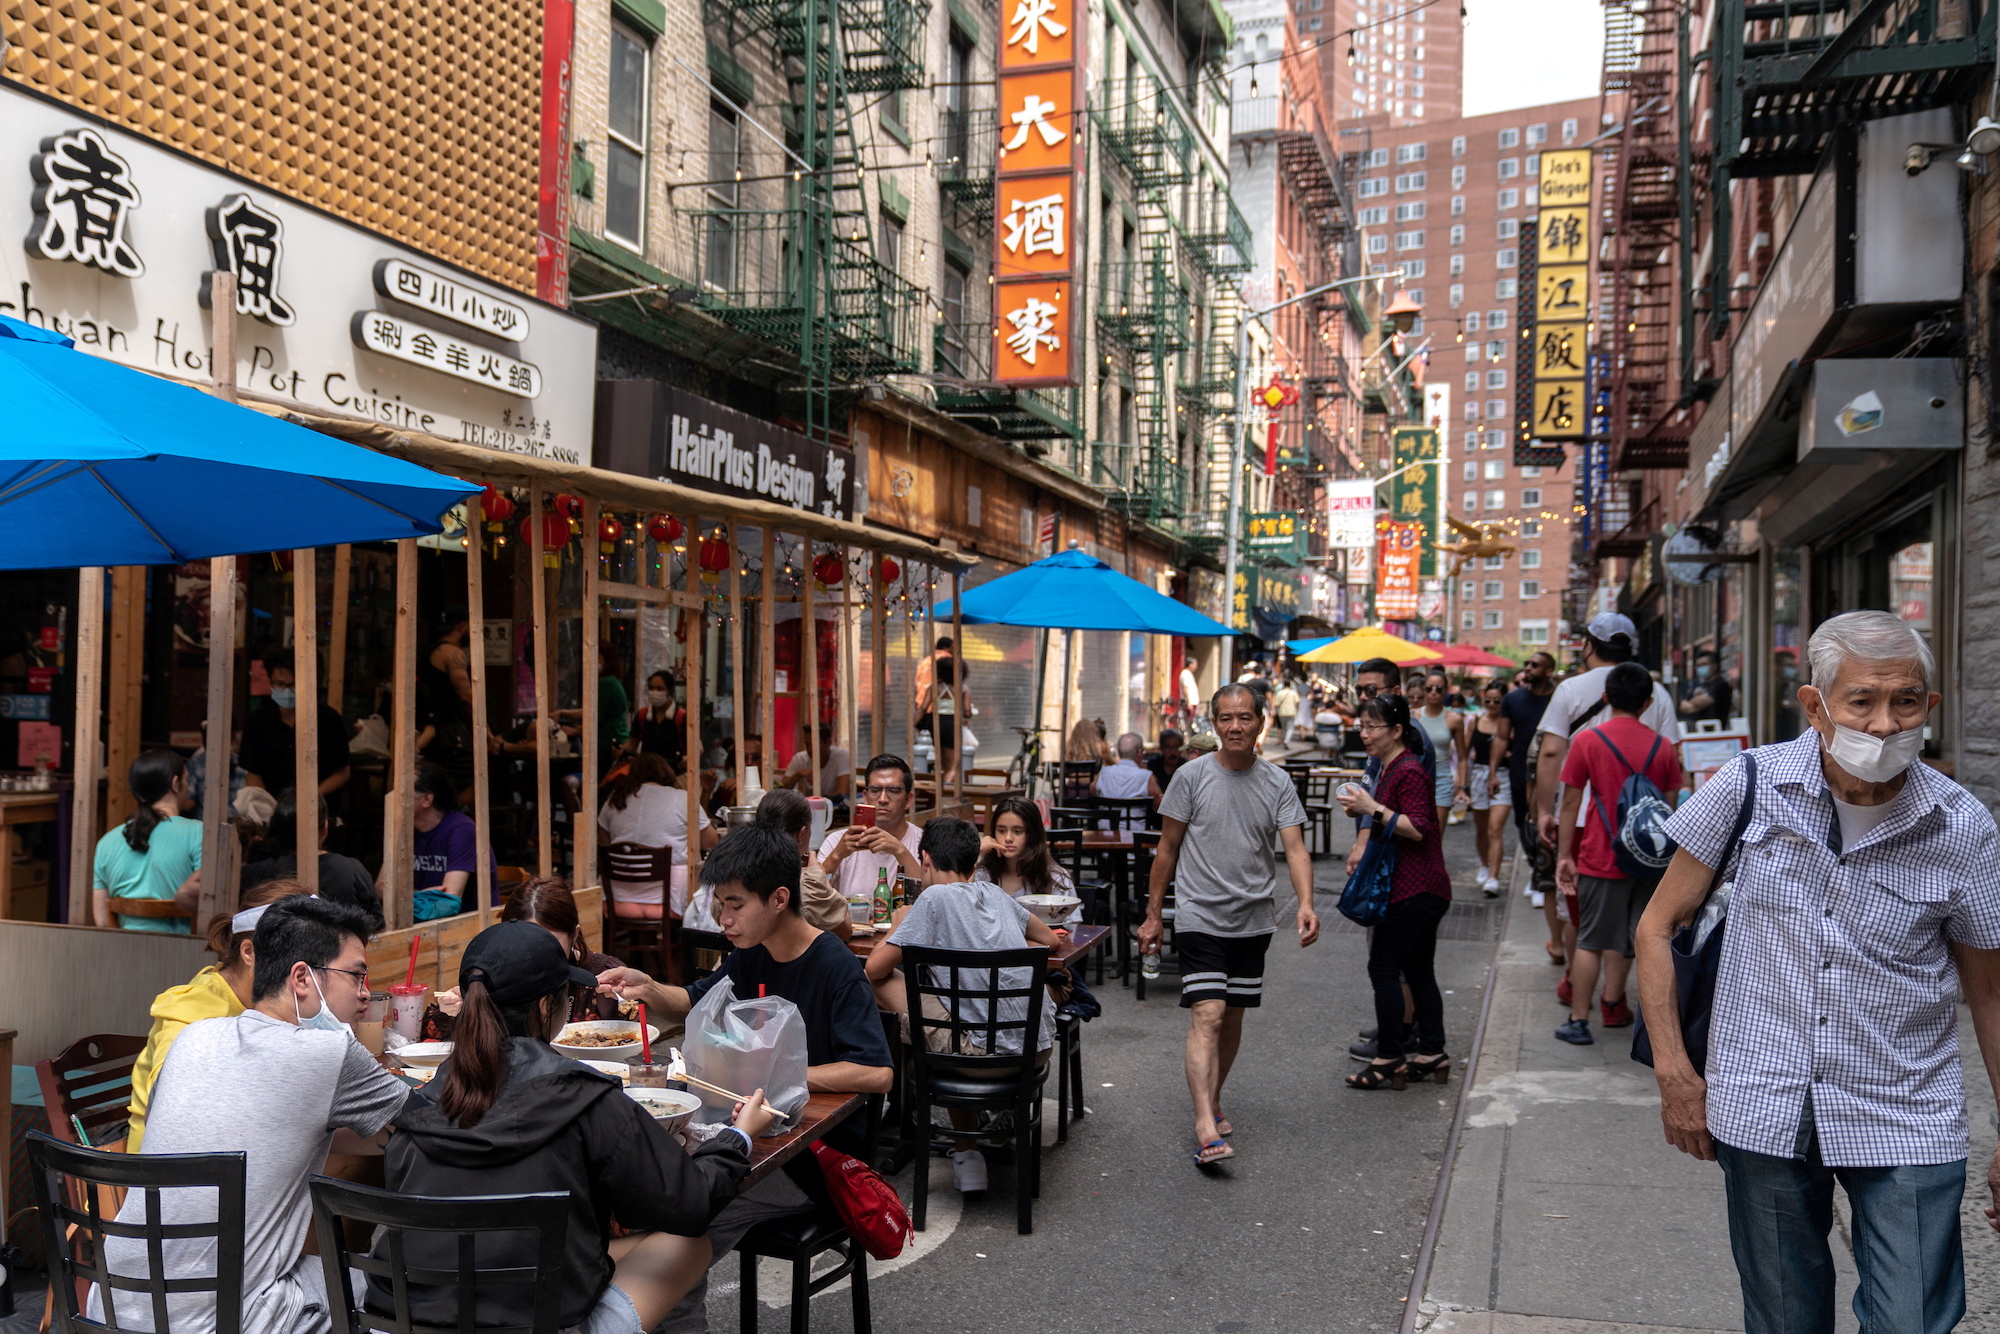 FILE PHOTO: People sit in an outdoor dining area in Manhattan's Chinatown district in New York City